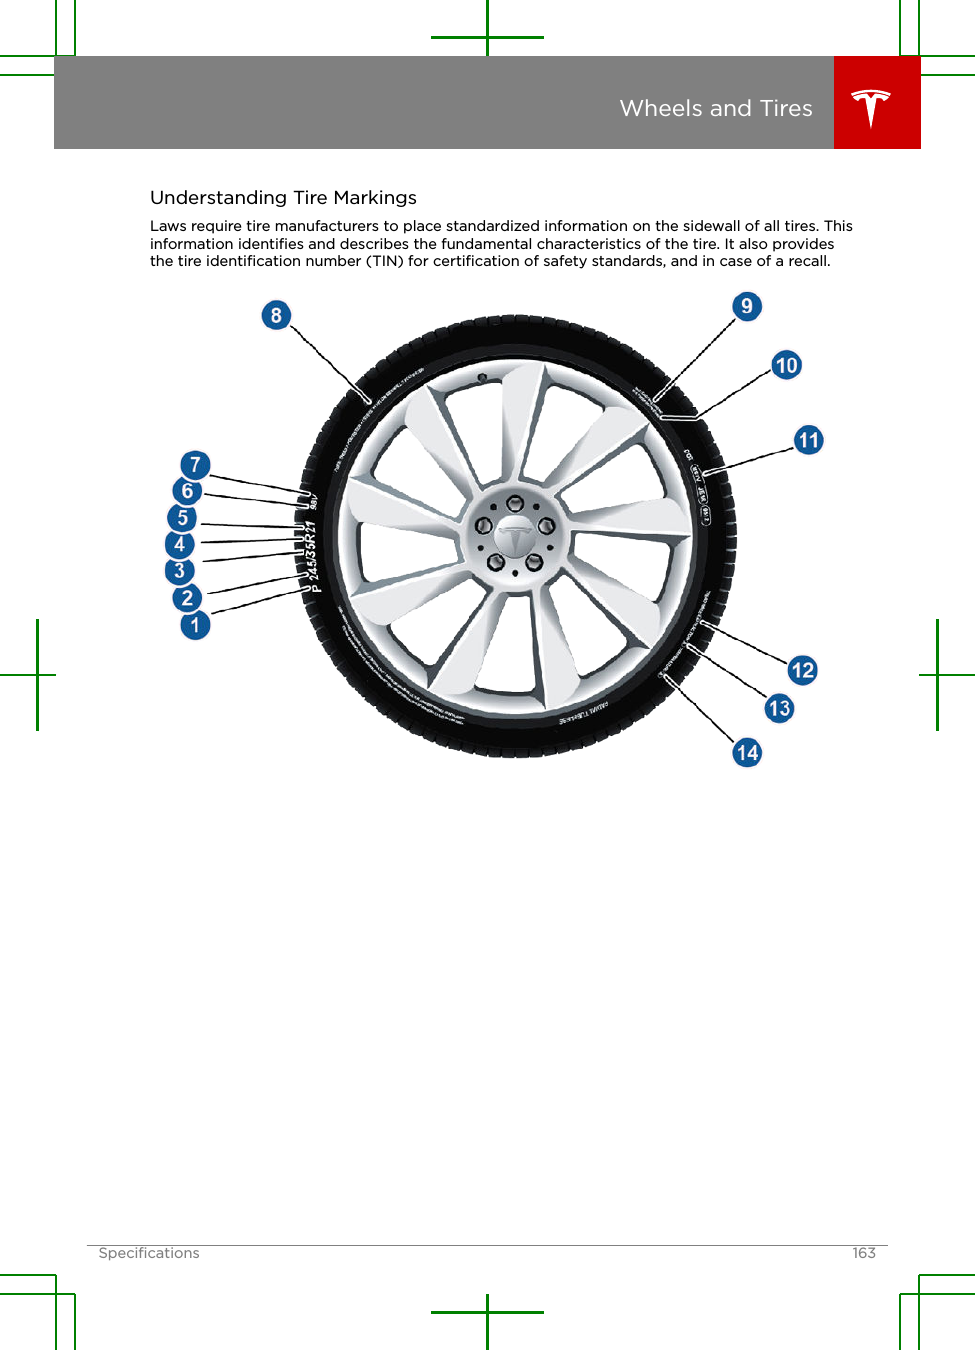 Understanding Tire MarkingsLaws require tire manufacturers to place standardized information on the sidewall of all tires. Thisinformation identiﬁes and describes the fundamental characteristics of the tire. It also providesthe tire identiﬁcation number (TIN) for certiﬁcation of safety standards, and in case of a recall.Wheels and TiresSpeciﬁcations 163